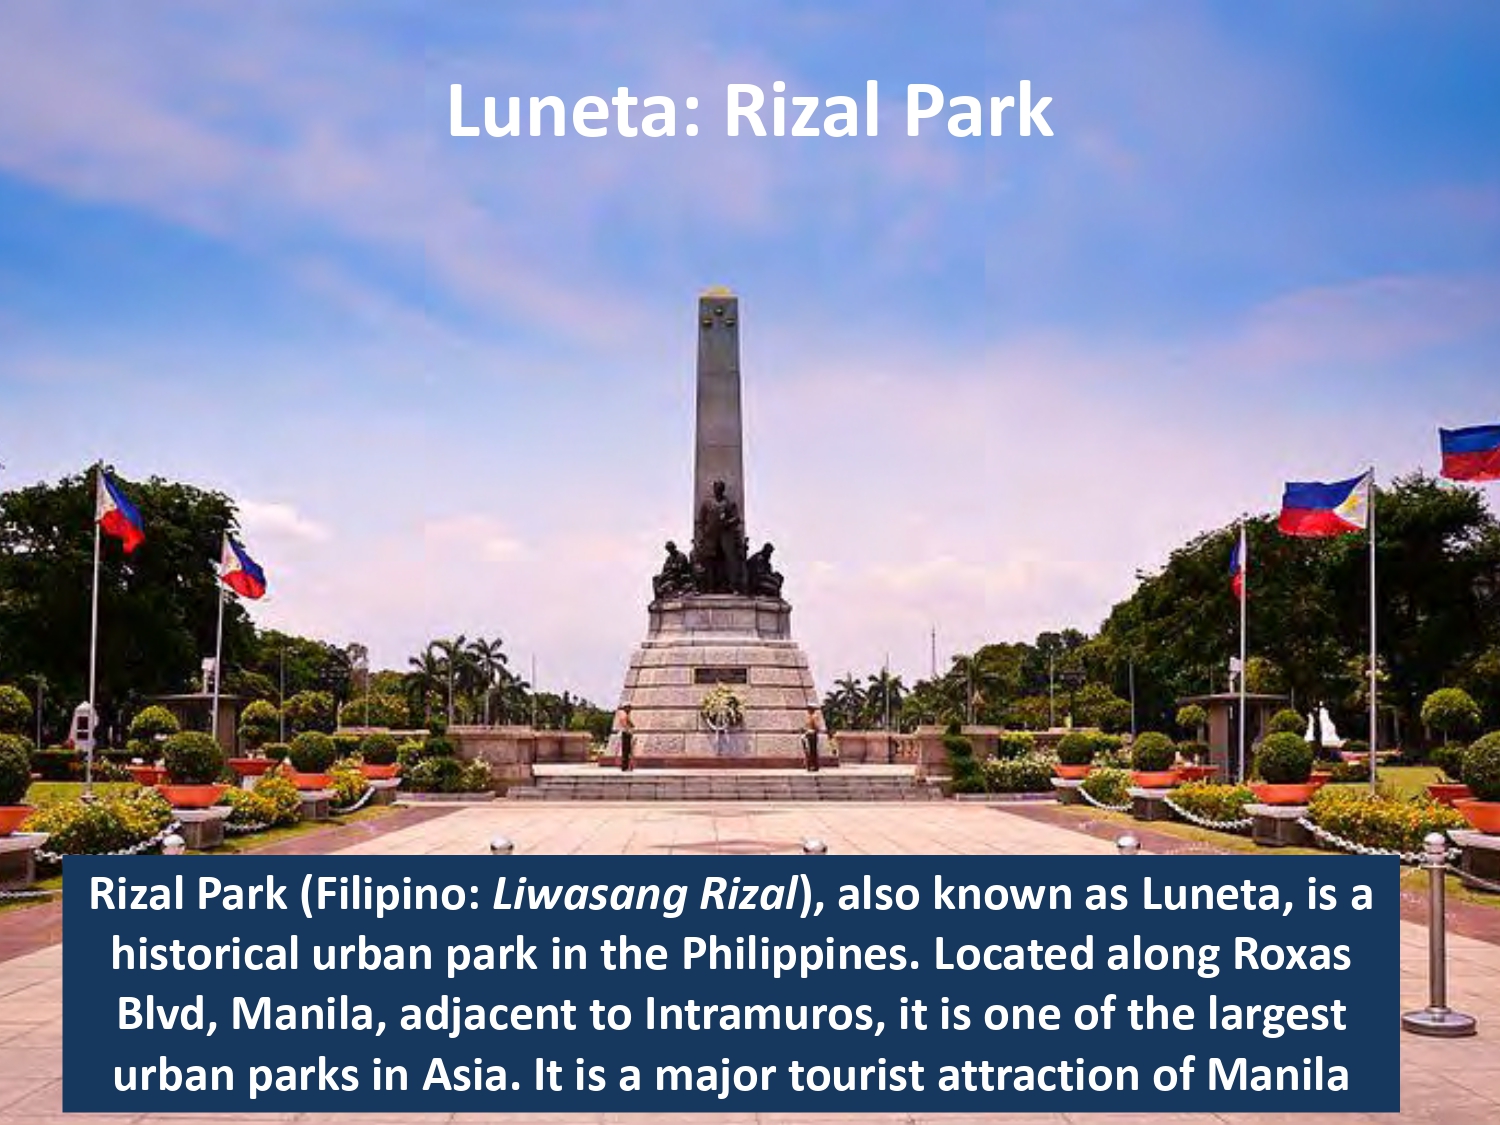 Rizal Park (Filipino: Liwasang Rizal), also known as Luneta, is a historical urban park in the Philippines. Located along Roxas Blvd, Manila, adjacent to Intramuros, it is one of the largest urban parks in Asia. It is a major tourist attraction of Manila